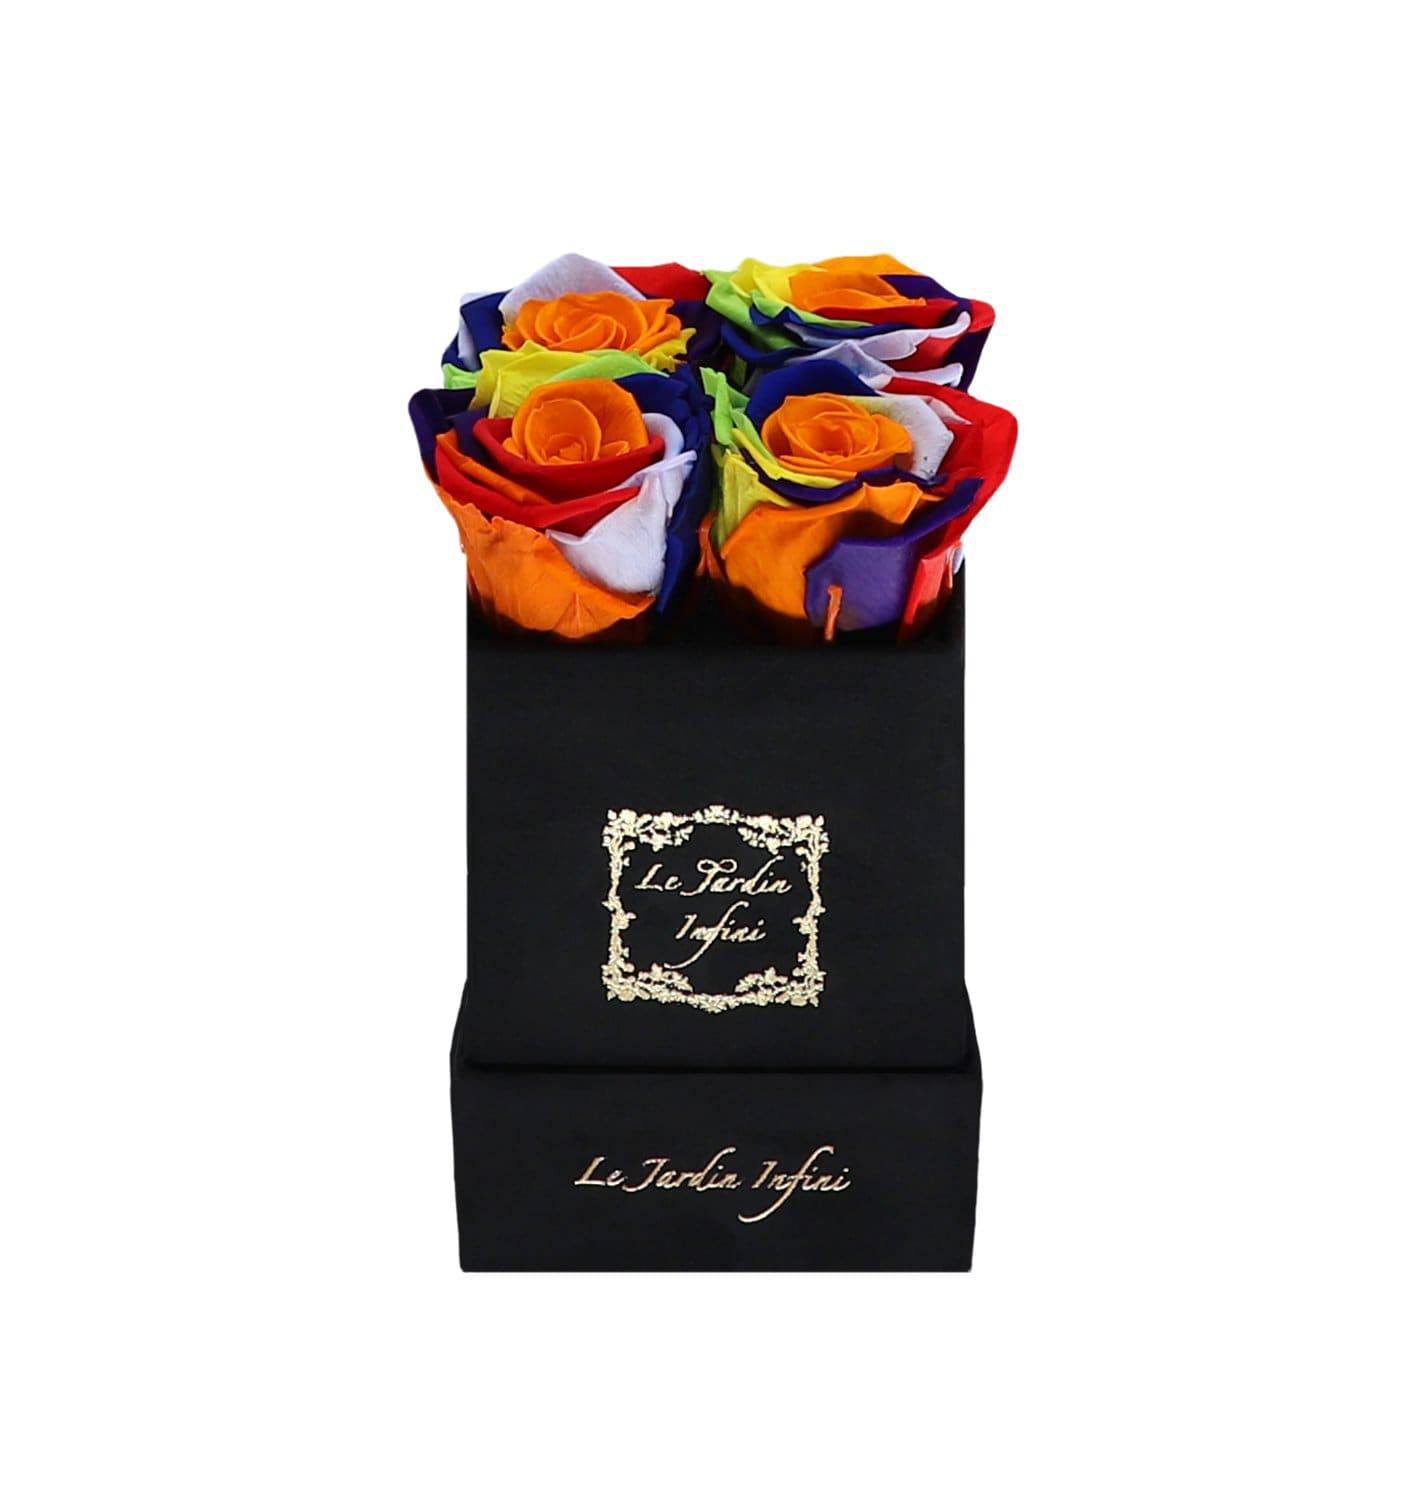 Rainbow Preserved Roses - Small Square Black Suede Box